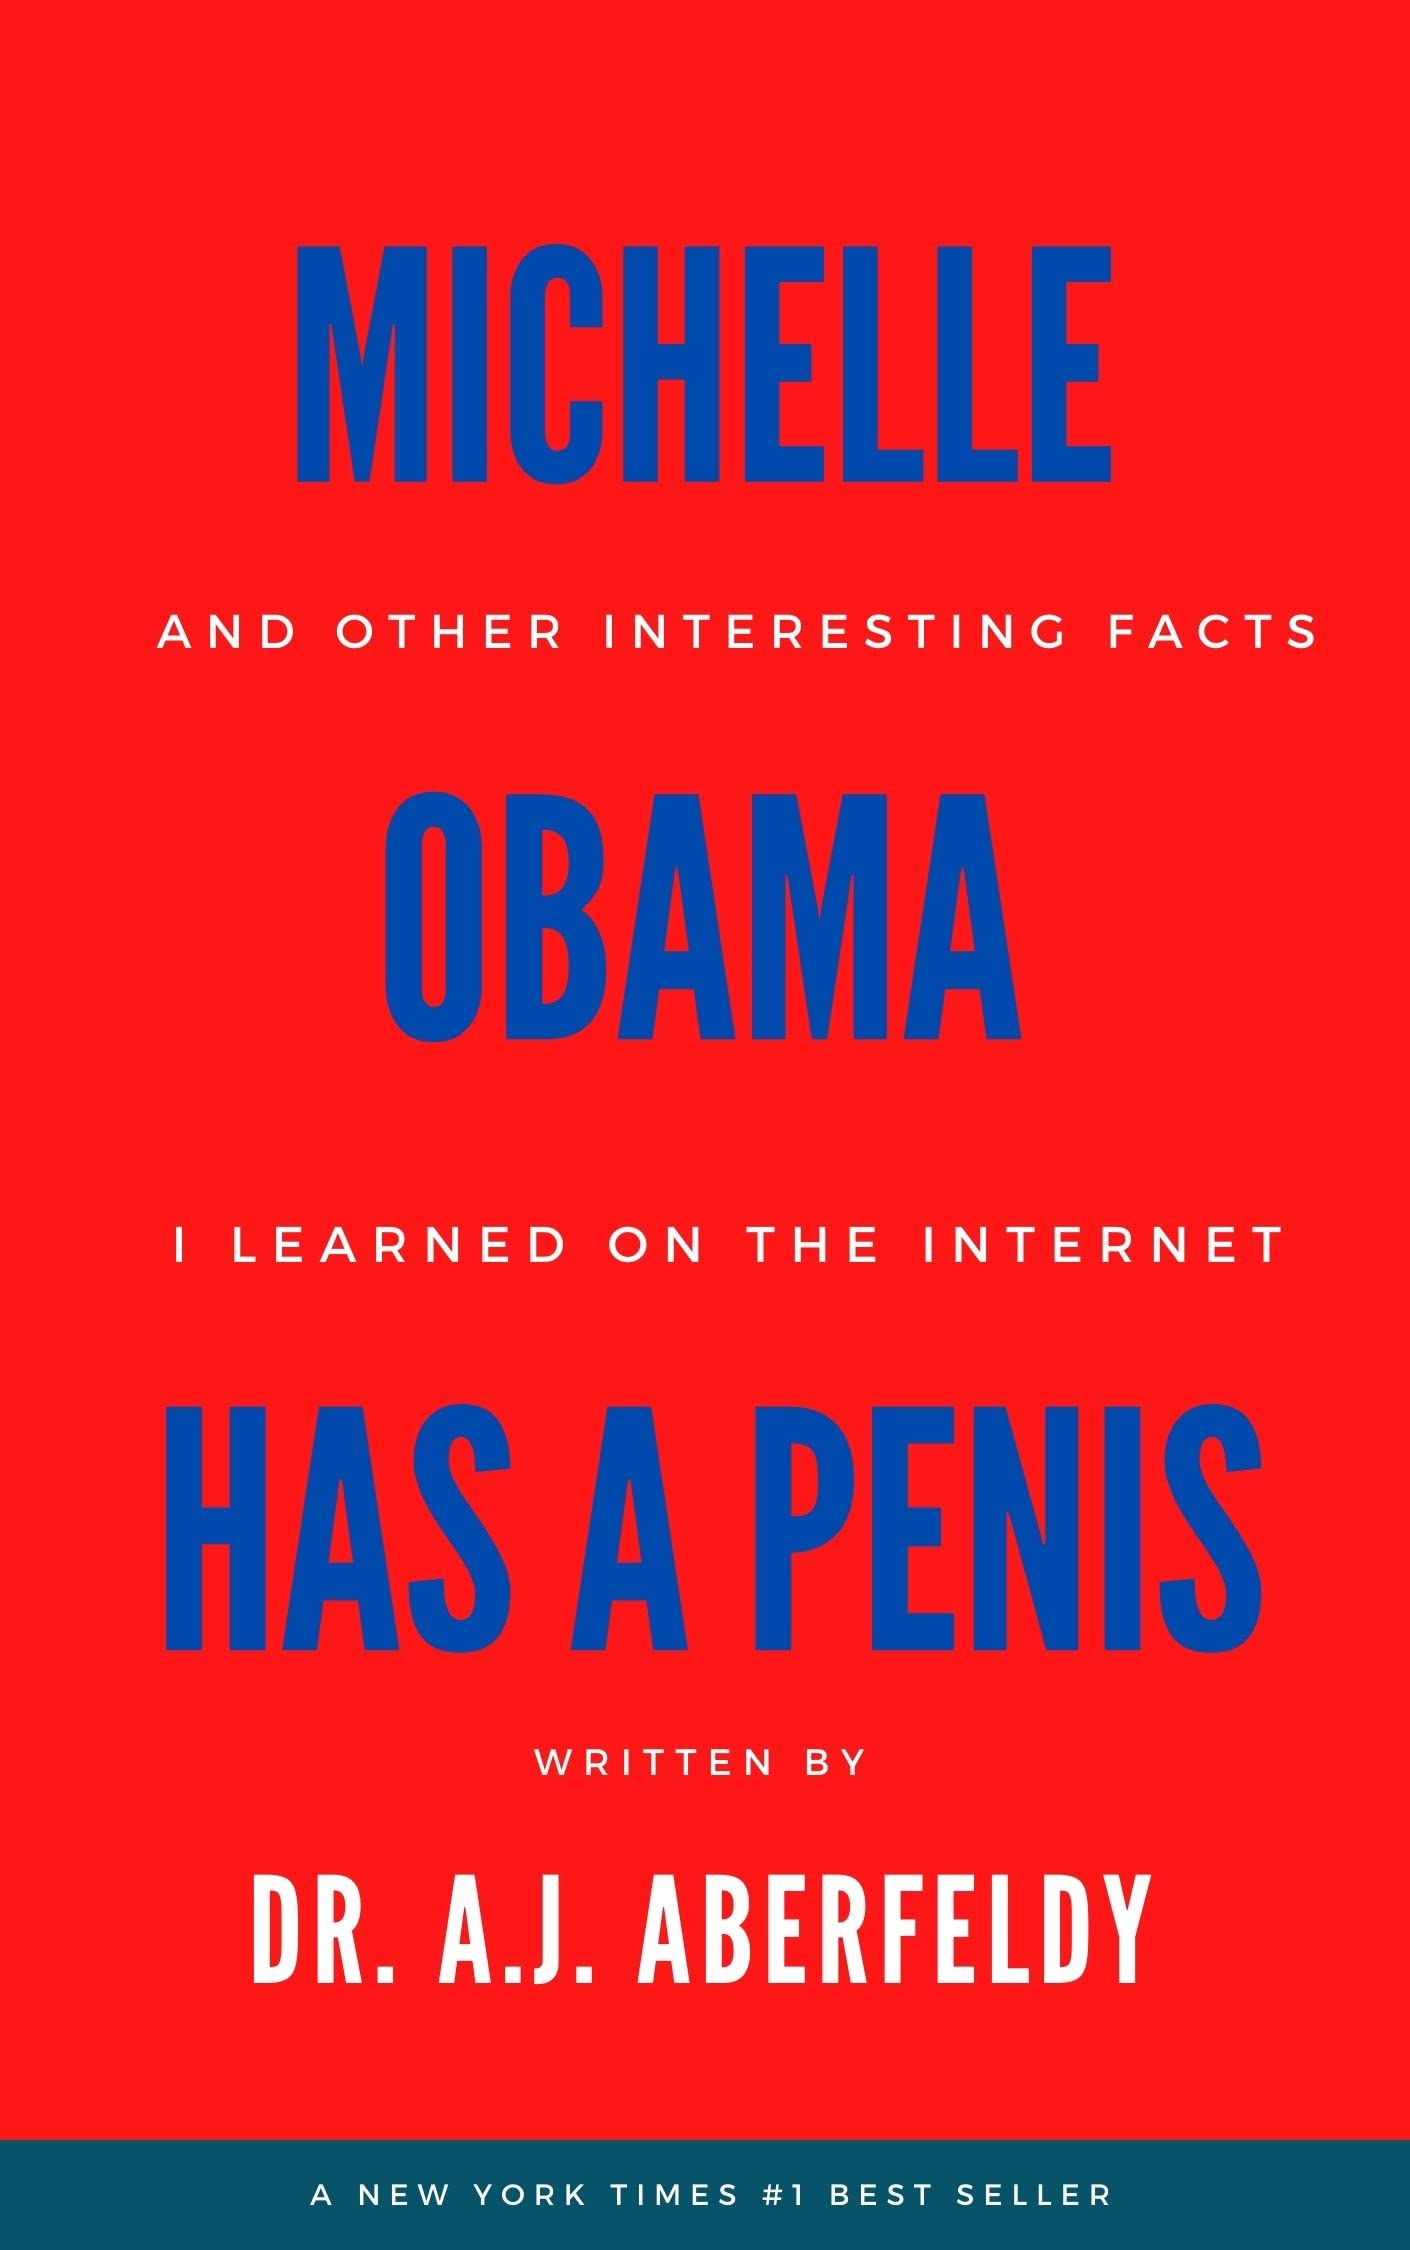 Best of Michelle obama has a penis